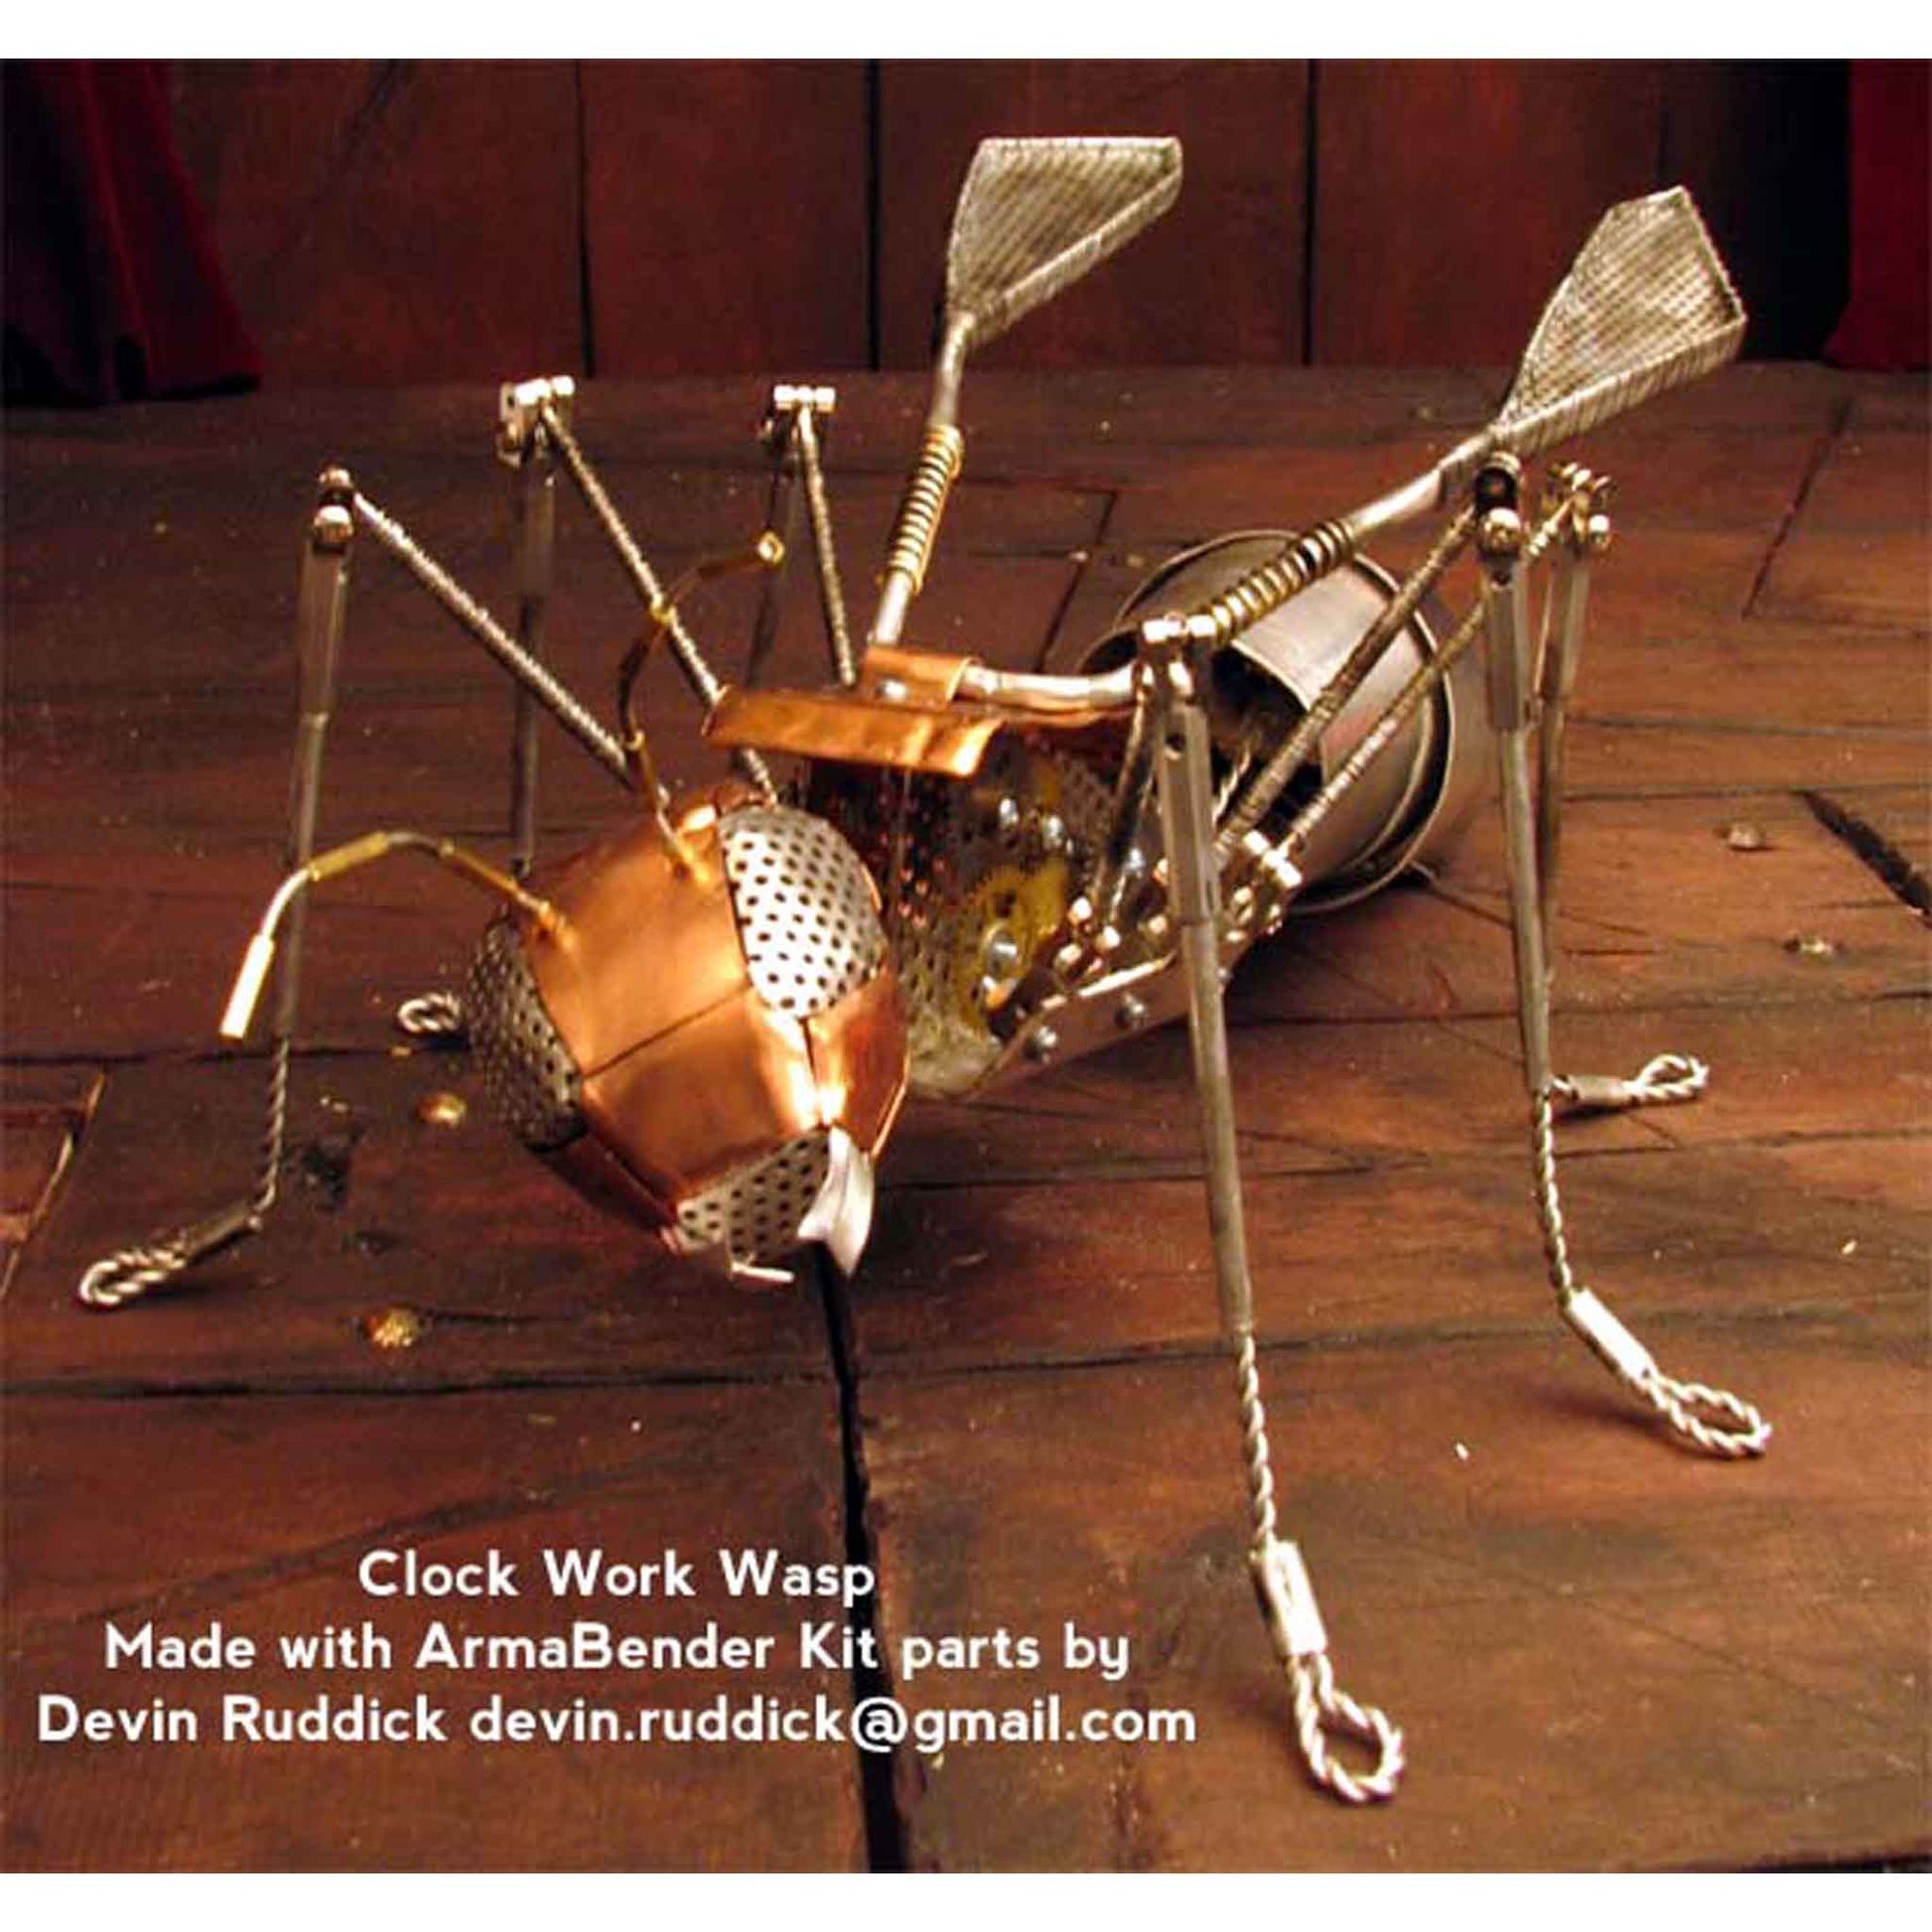 The Clock Work Wasp, made with ArmaBender kit parts, by Devin Ruddick